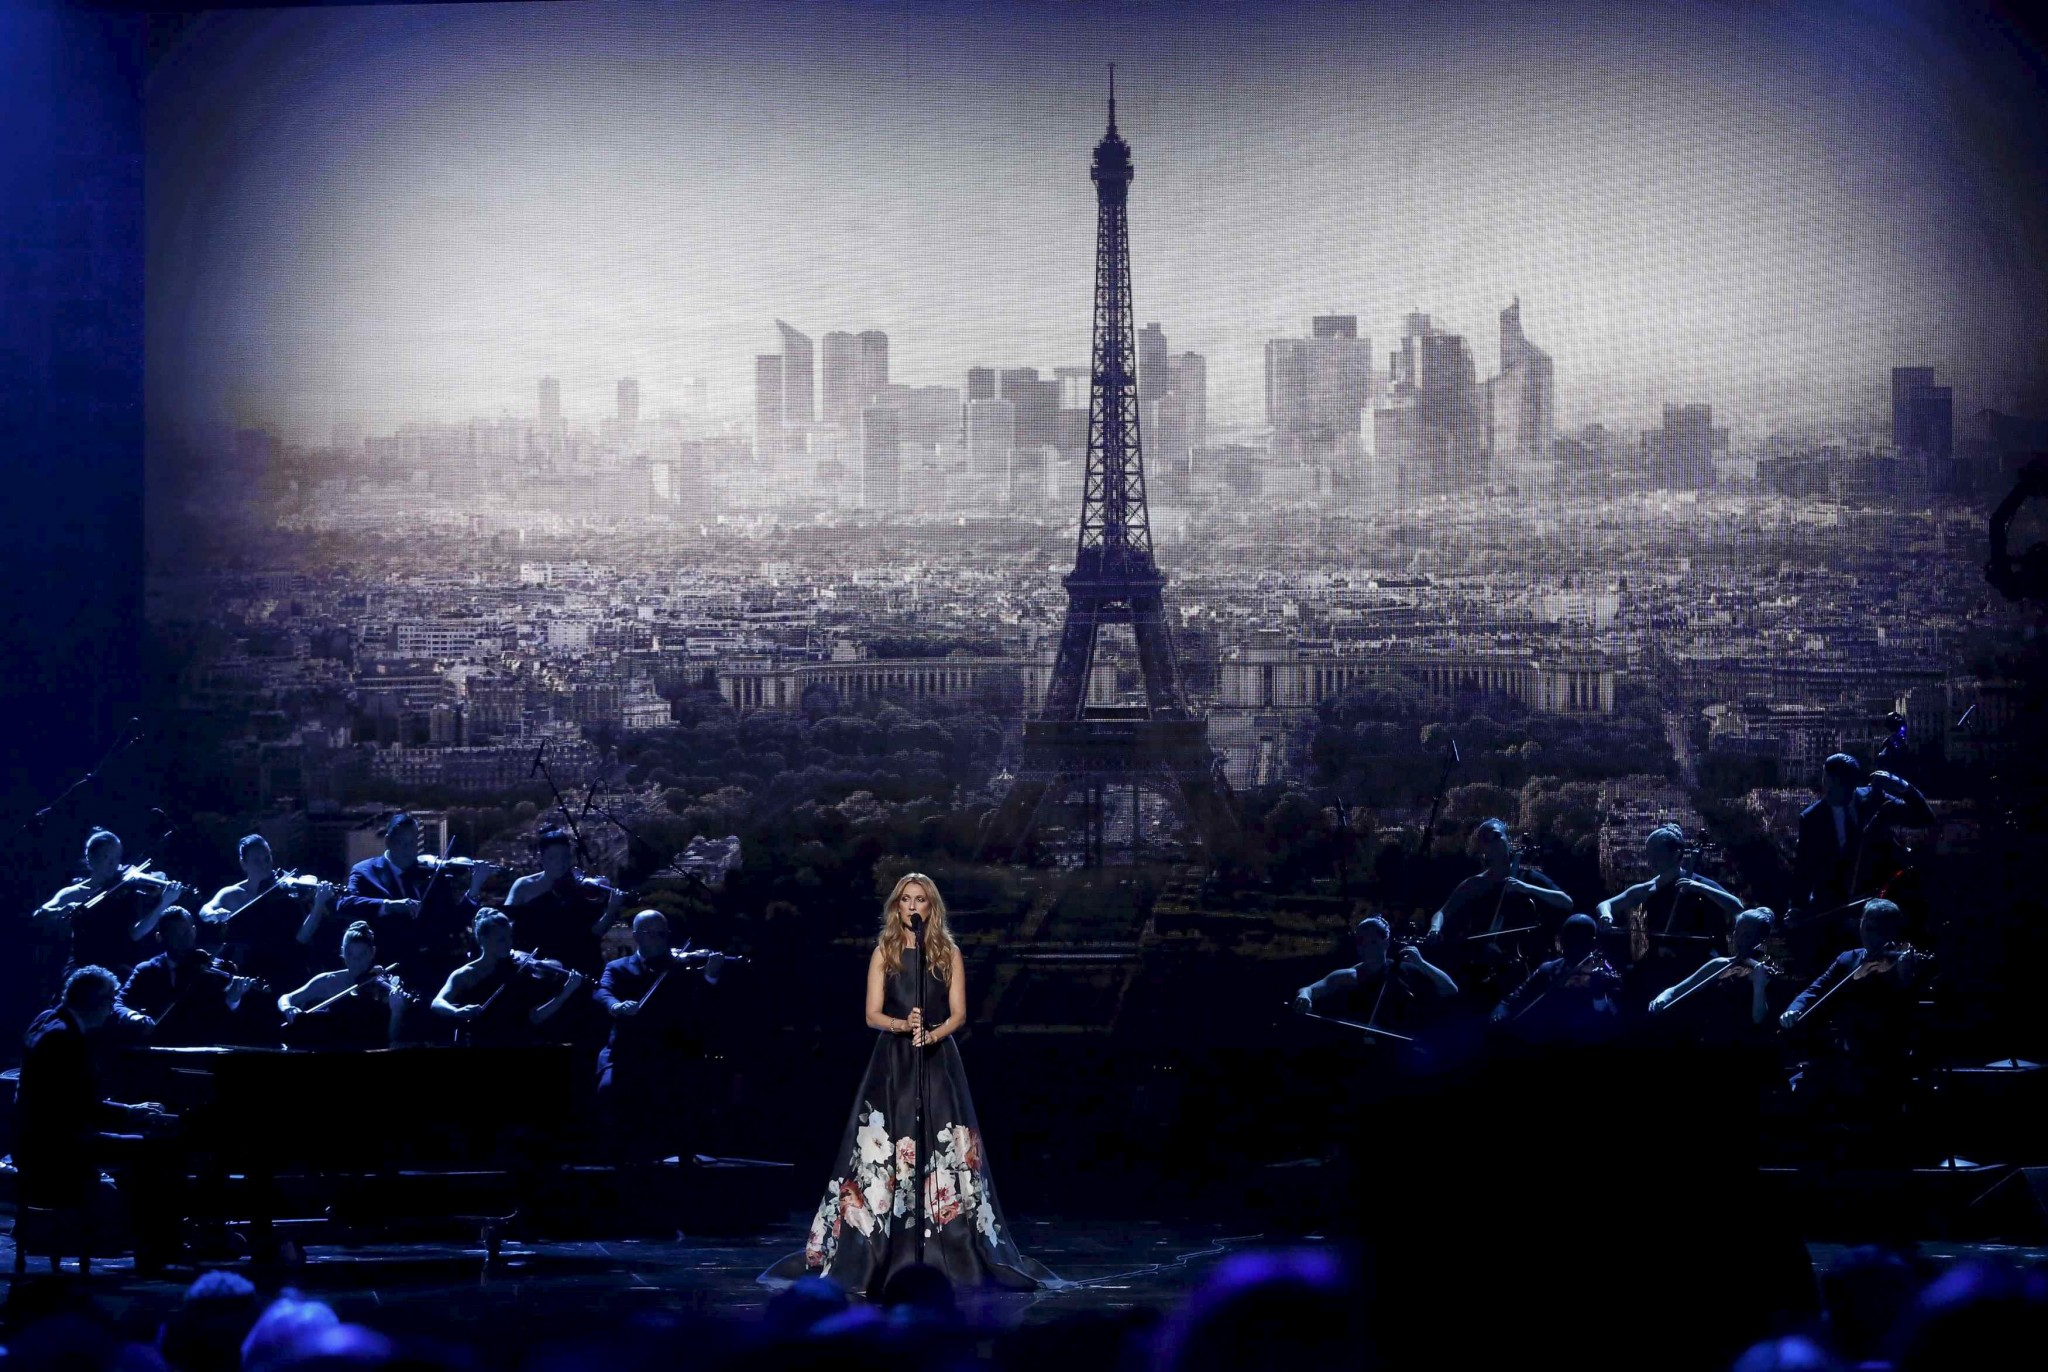 Celine Dion performs "Hymne a l'amour" (Ode to love) in honor of the victims of the recent Paris attacks as an image of the Eiffel Tower is shown in the background during the 2015 American Music Awards in Los Angeles, California November 22, 2015. REUTERS/Mario Anzuoni TPX IMAGES OF THE DAY